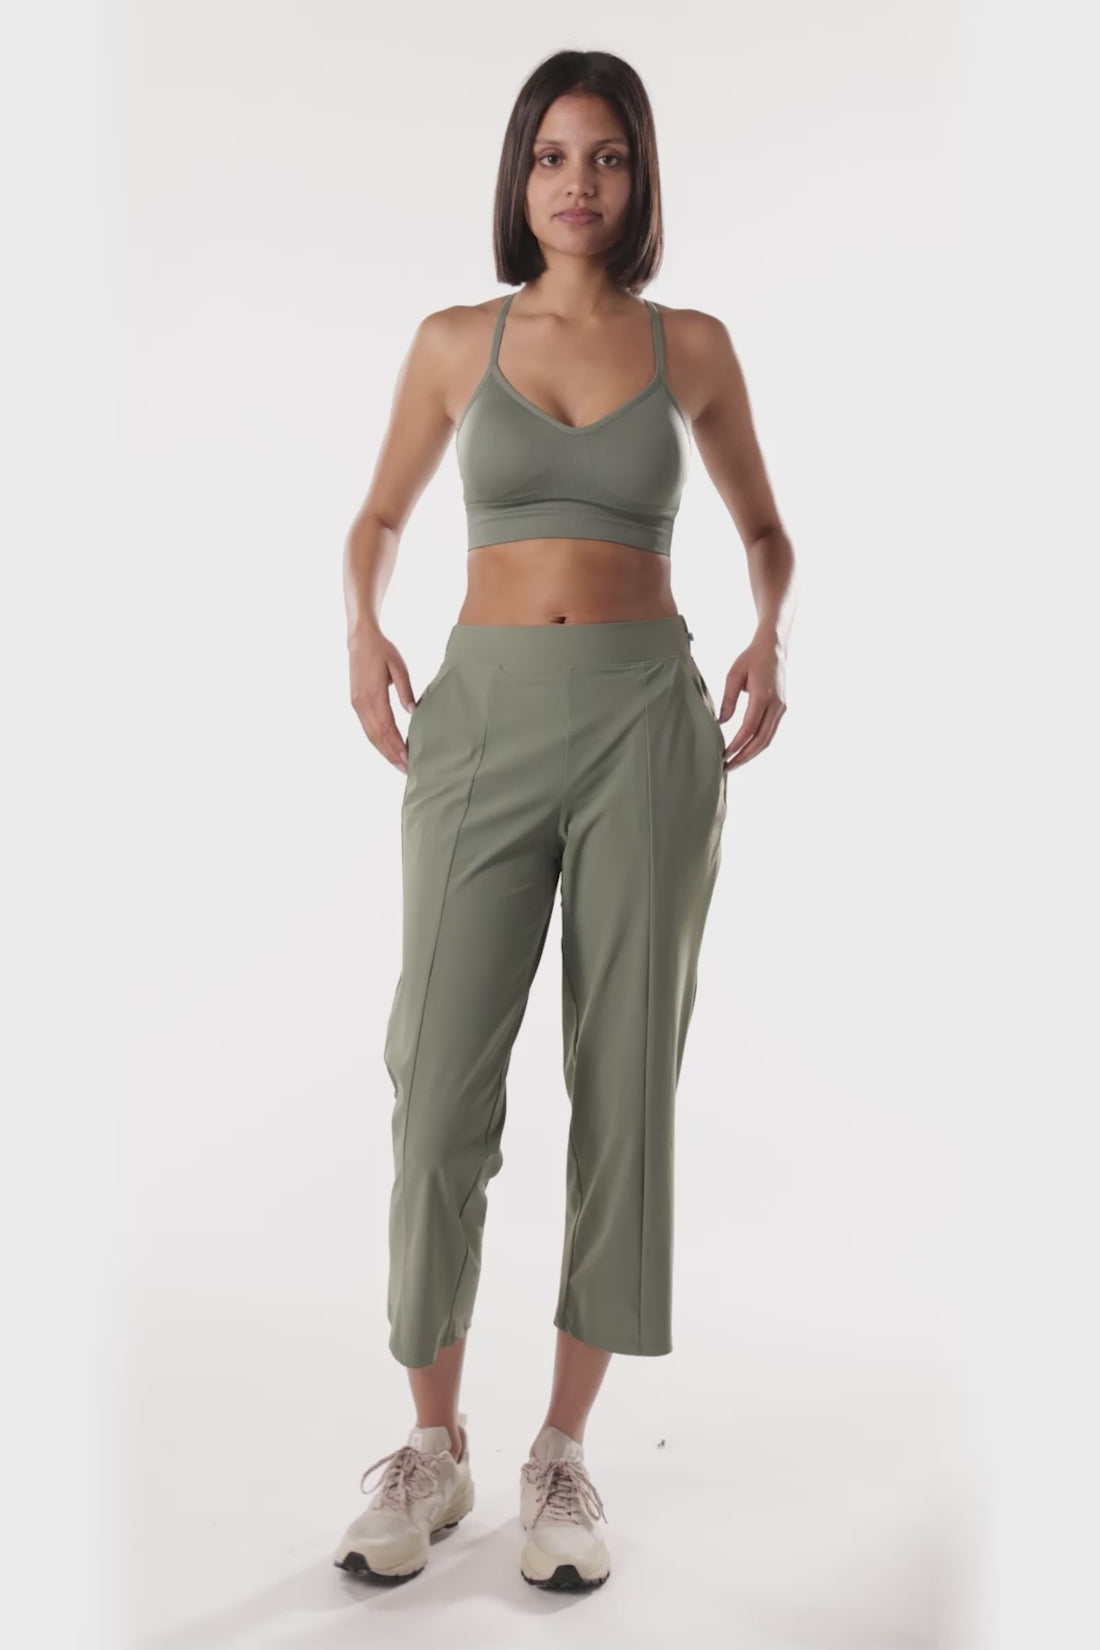 Crush On You Athleisure Set - Haus of Swag